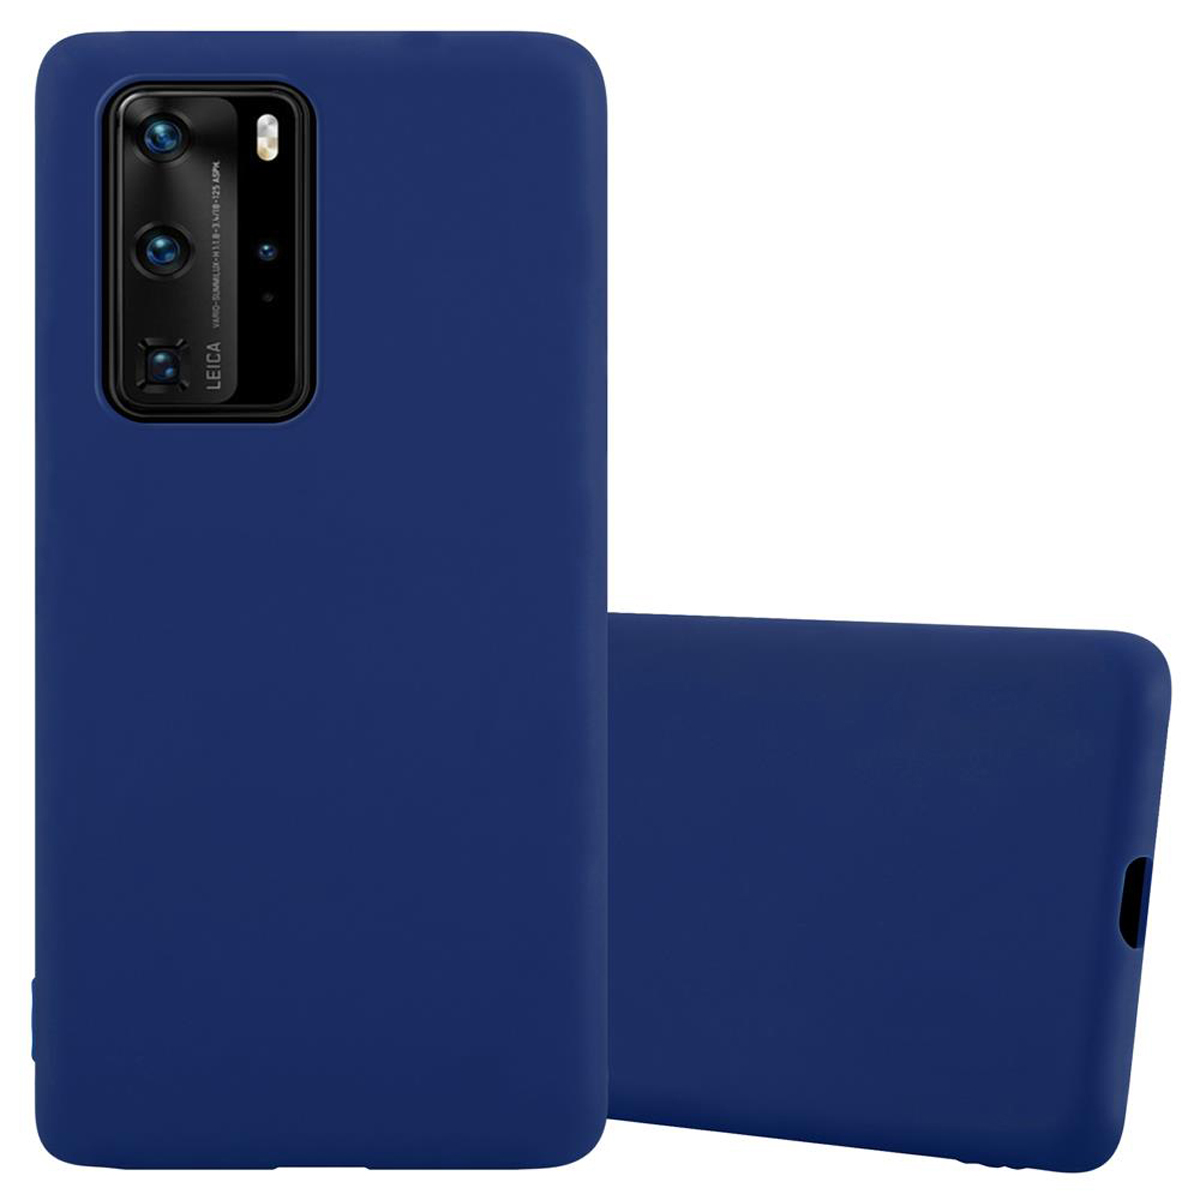 TPU CADORABO Candy BLAU Backcover, / PRO+, P40 Style, Huawei, Hülle CANDY PRO DUNKEL im P40